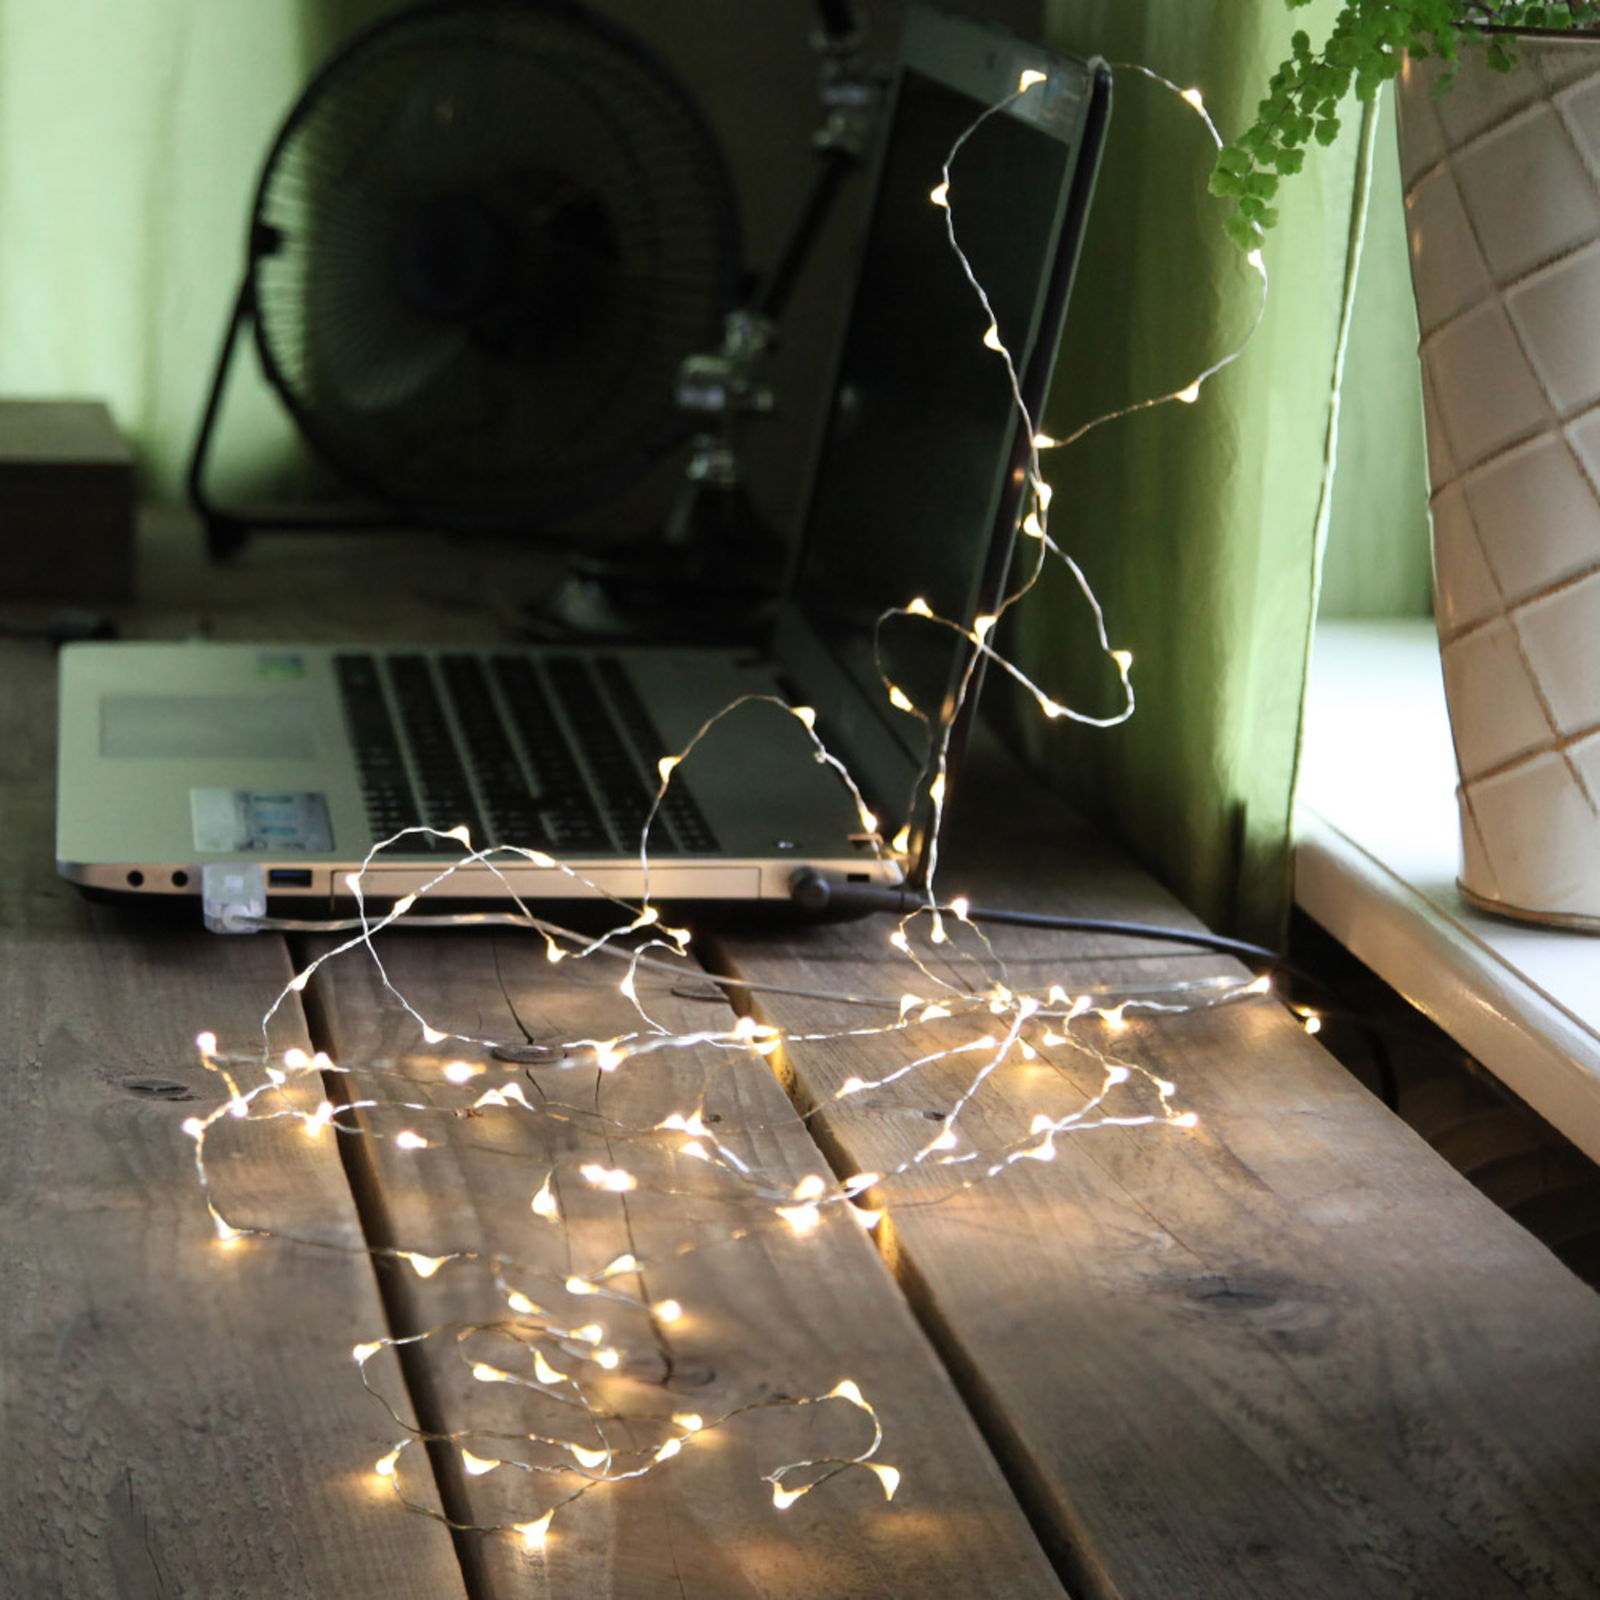 With USB connection - Dew Drop LED string lights